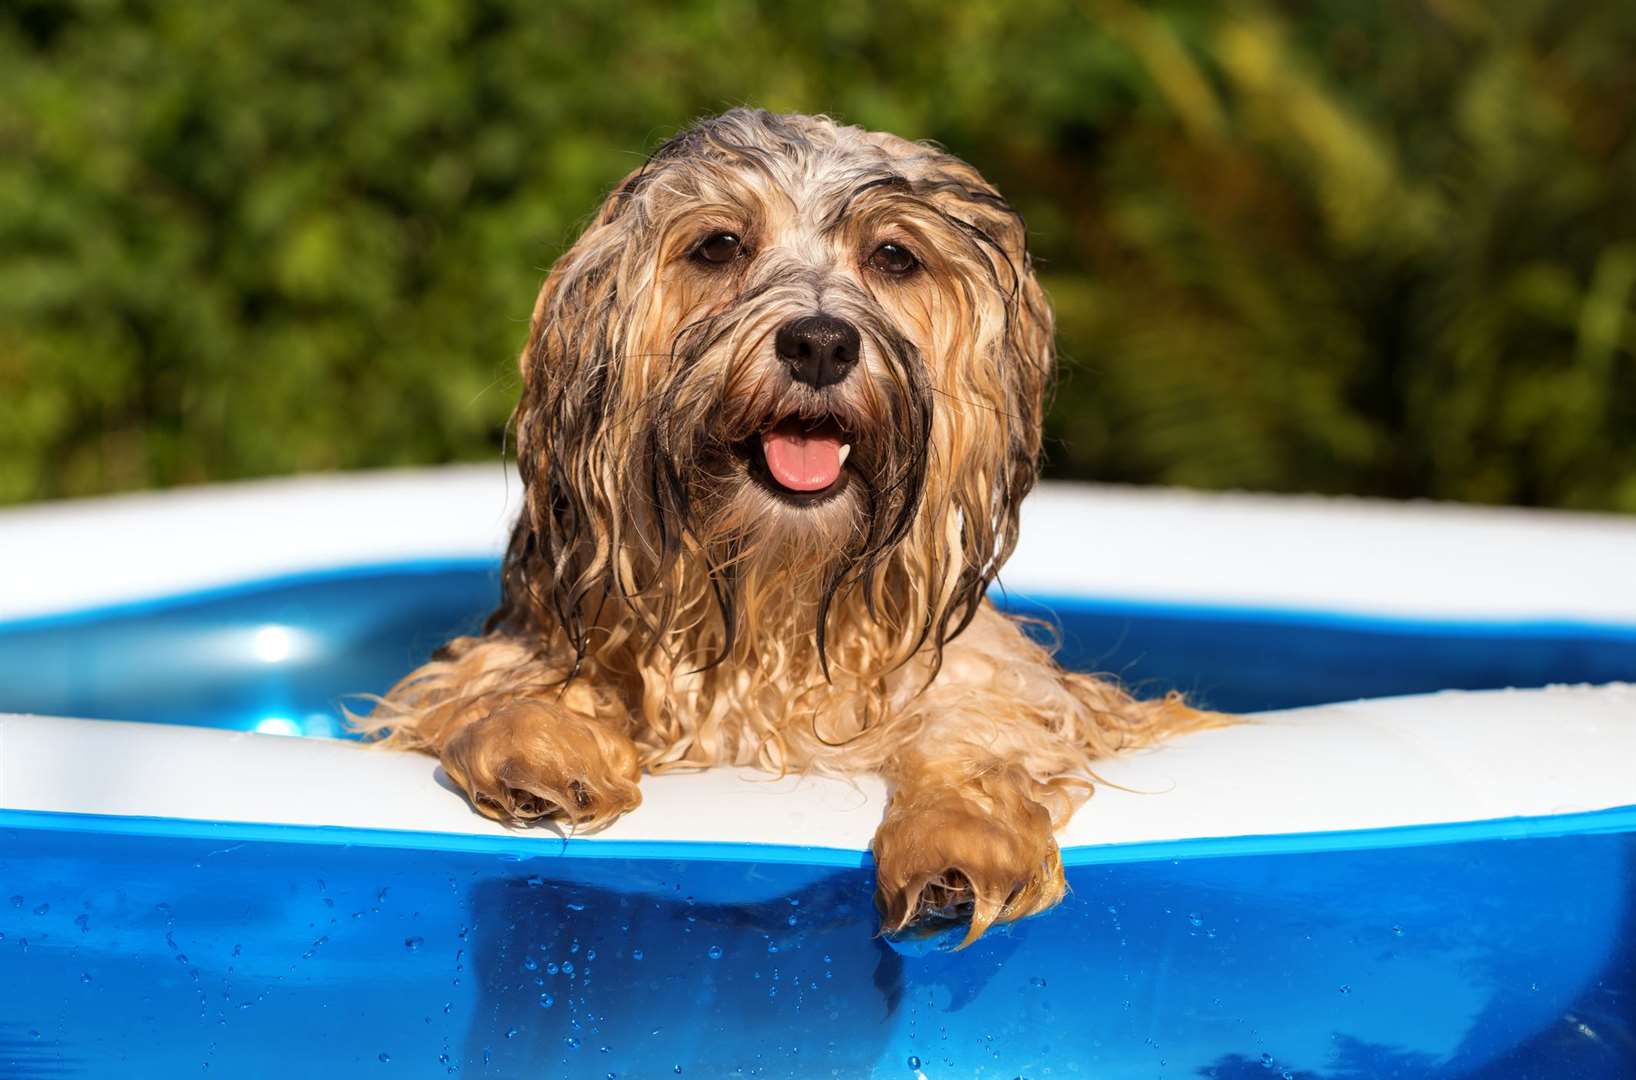 More customers will now start filling up paddling pools says South East Water. Image: Stock photo.